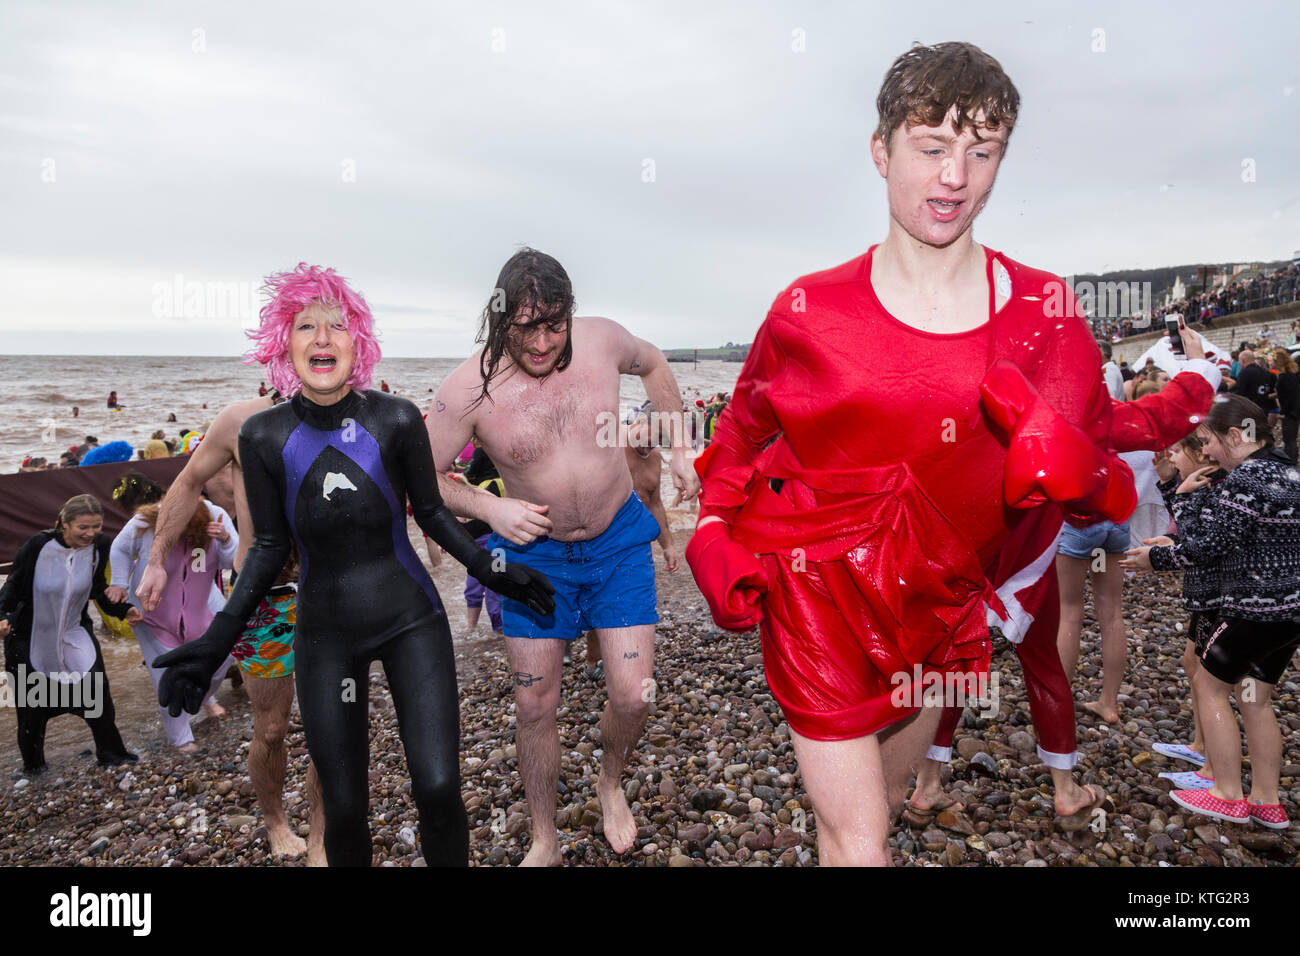 Sidmouth, Devon, UK. 26th Dec, 2017. Hundreds braved the freezing cold sea to join the annual Boxing Day swim at Sidmouth Devon. Credit: Photo Central/Alamy Live News Stock Photo